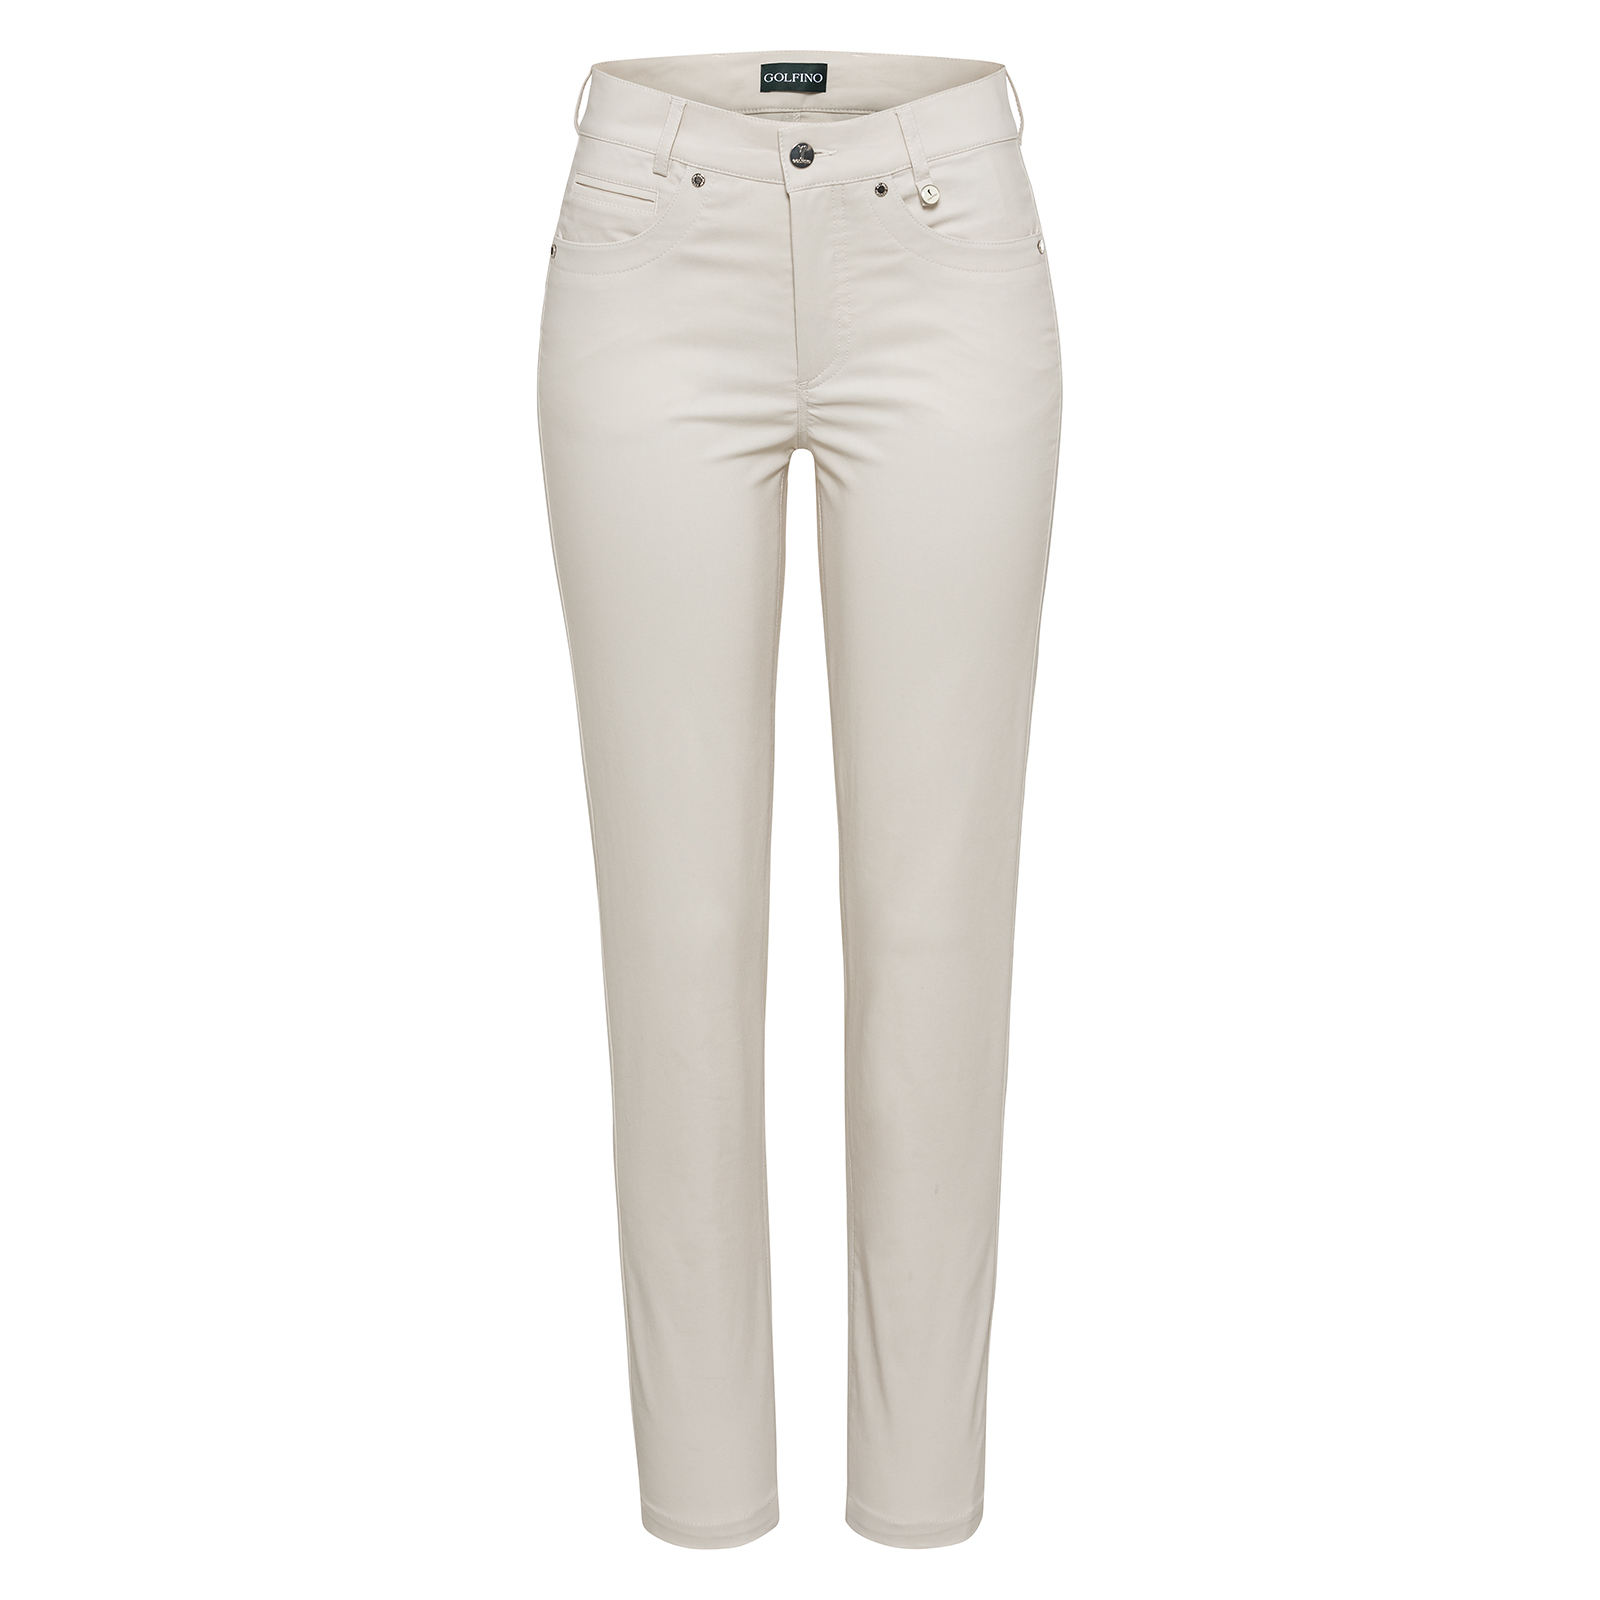 Ladies' 7/8 pants in 5-pocket style made from stretch material with sun protection function